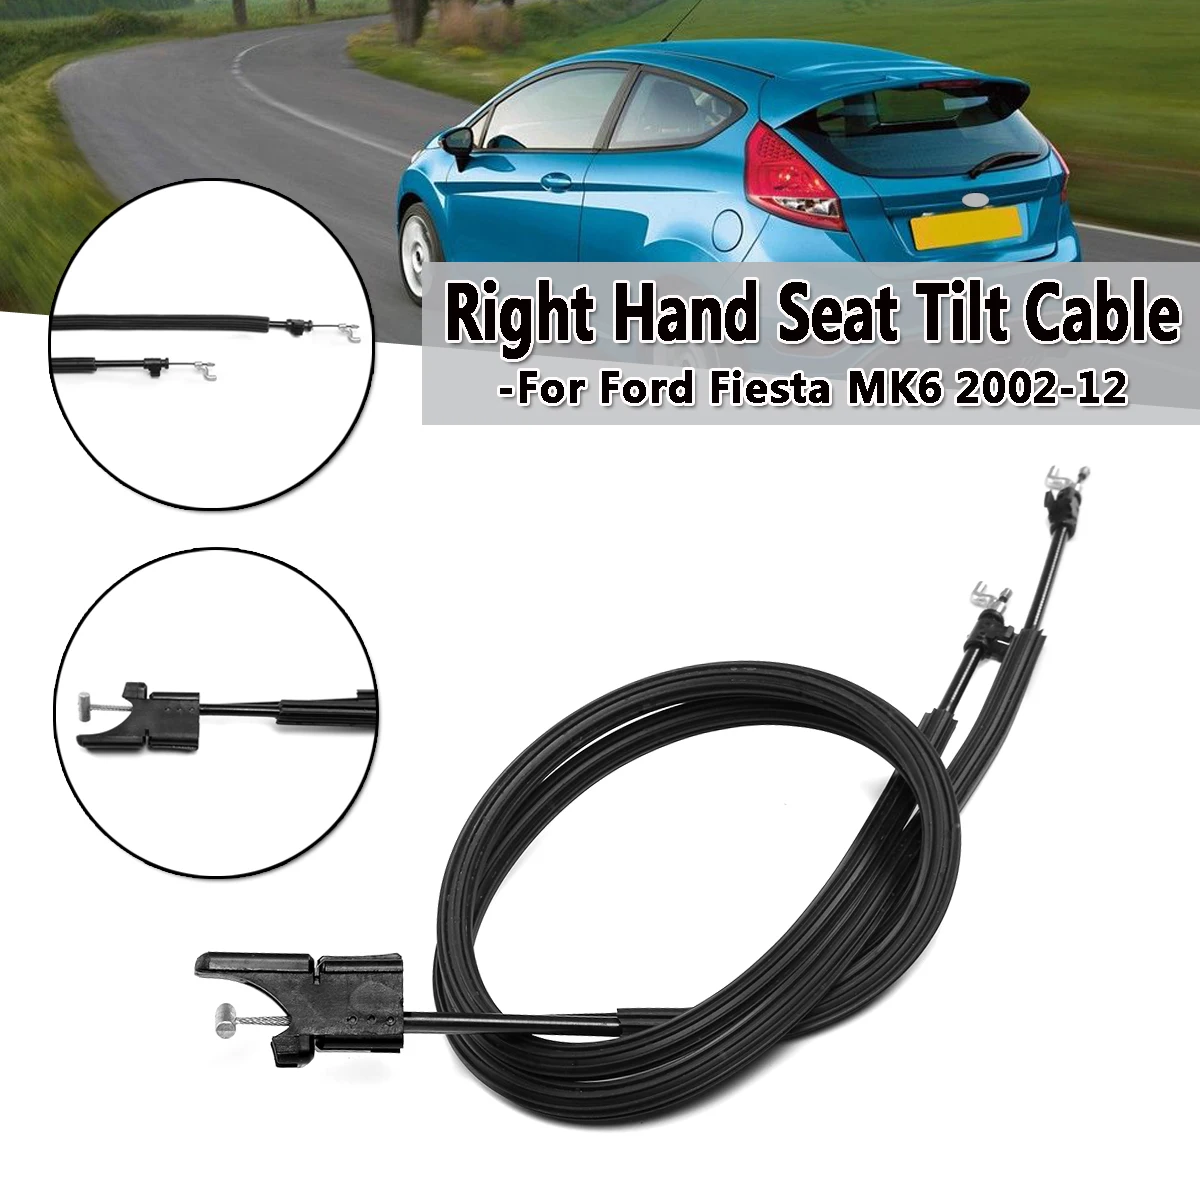 Genuine FORD Fiesta MK6 2001-2008 RH Right Hand Front Seat Tilt Cables 